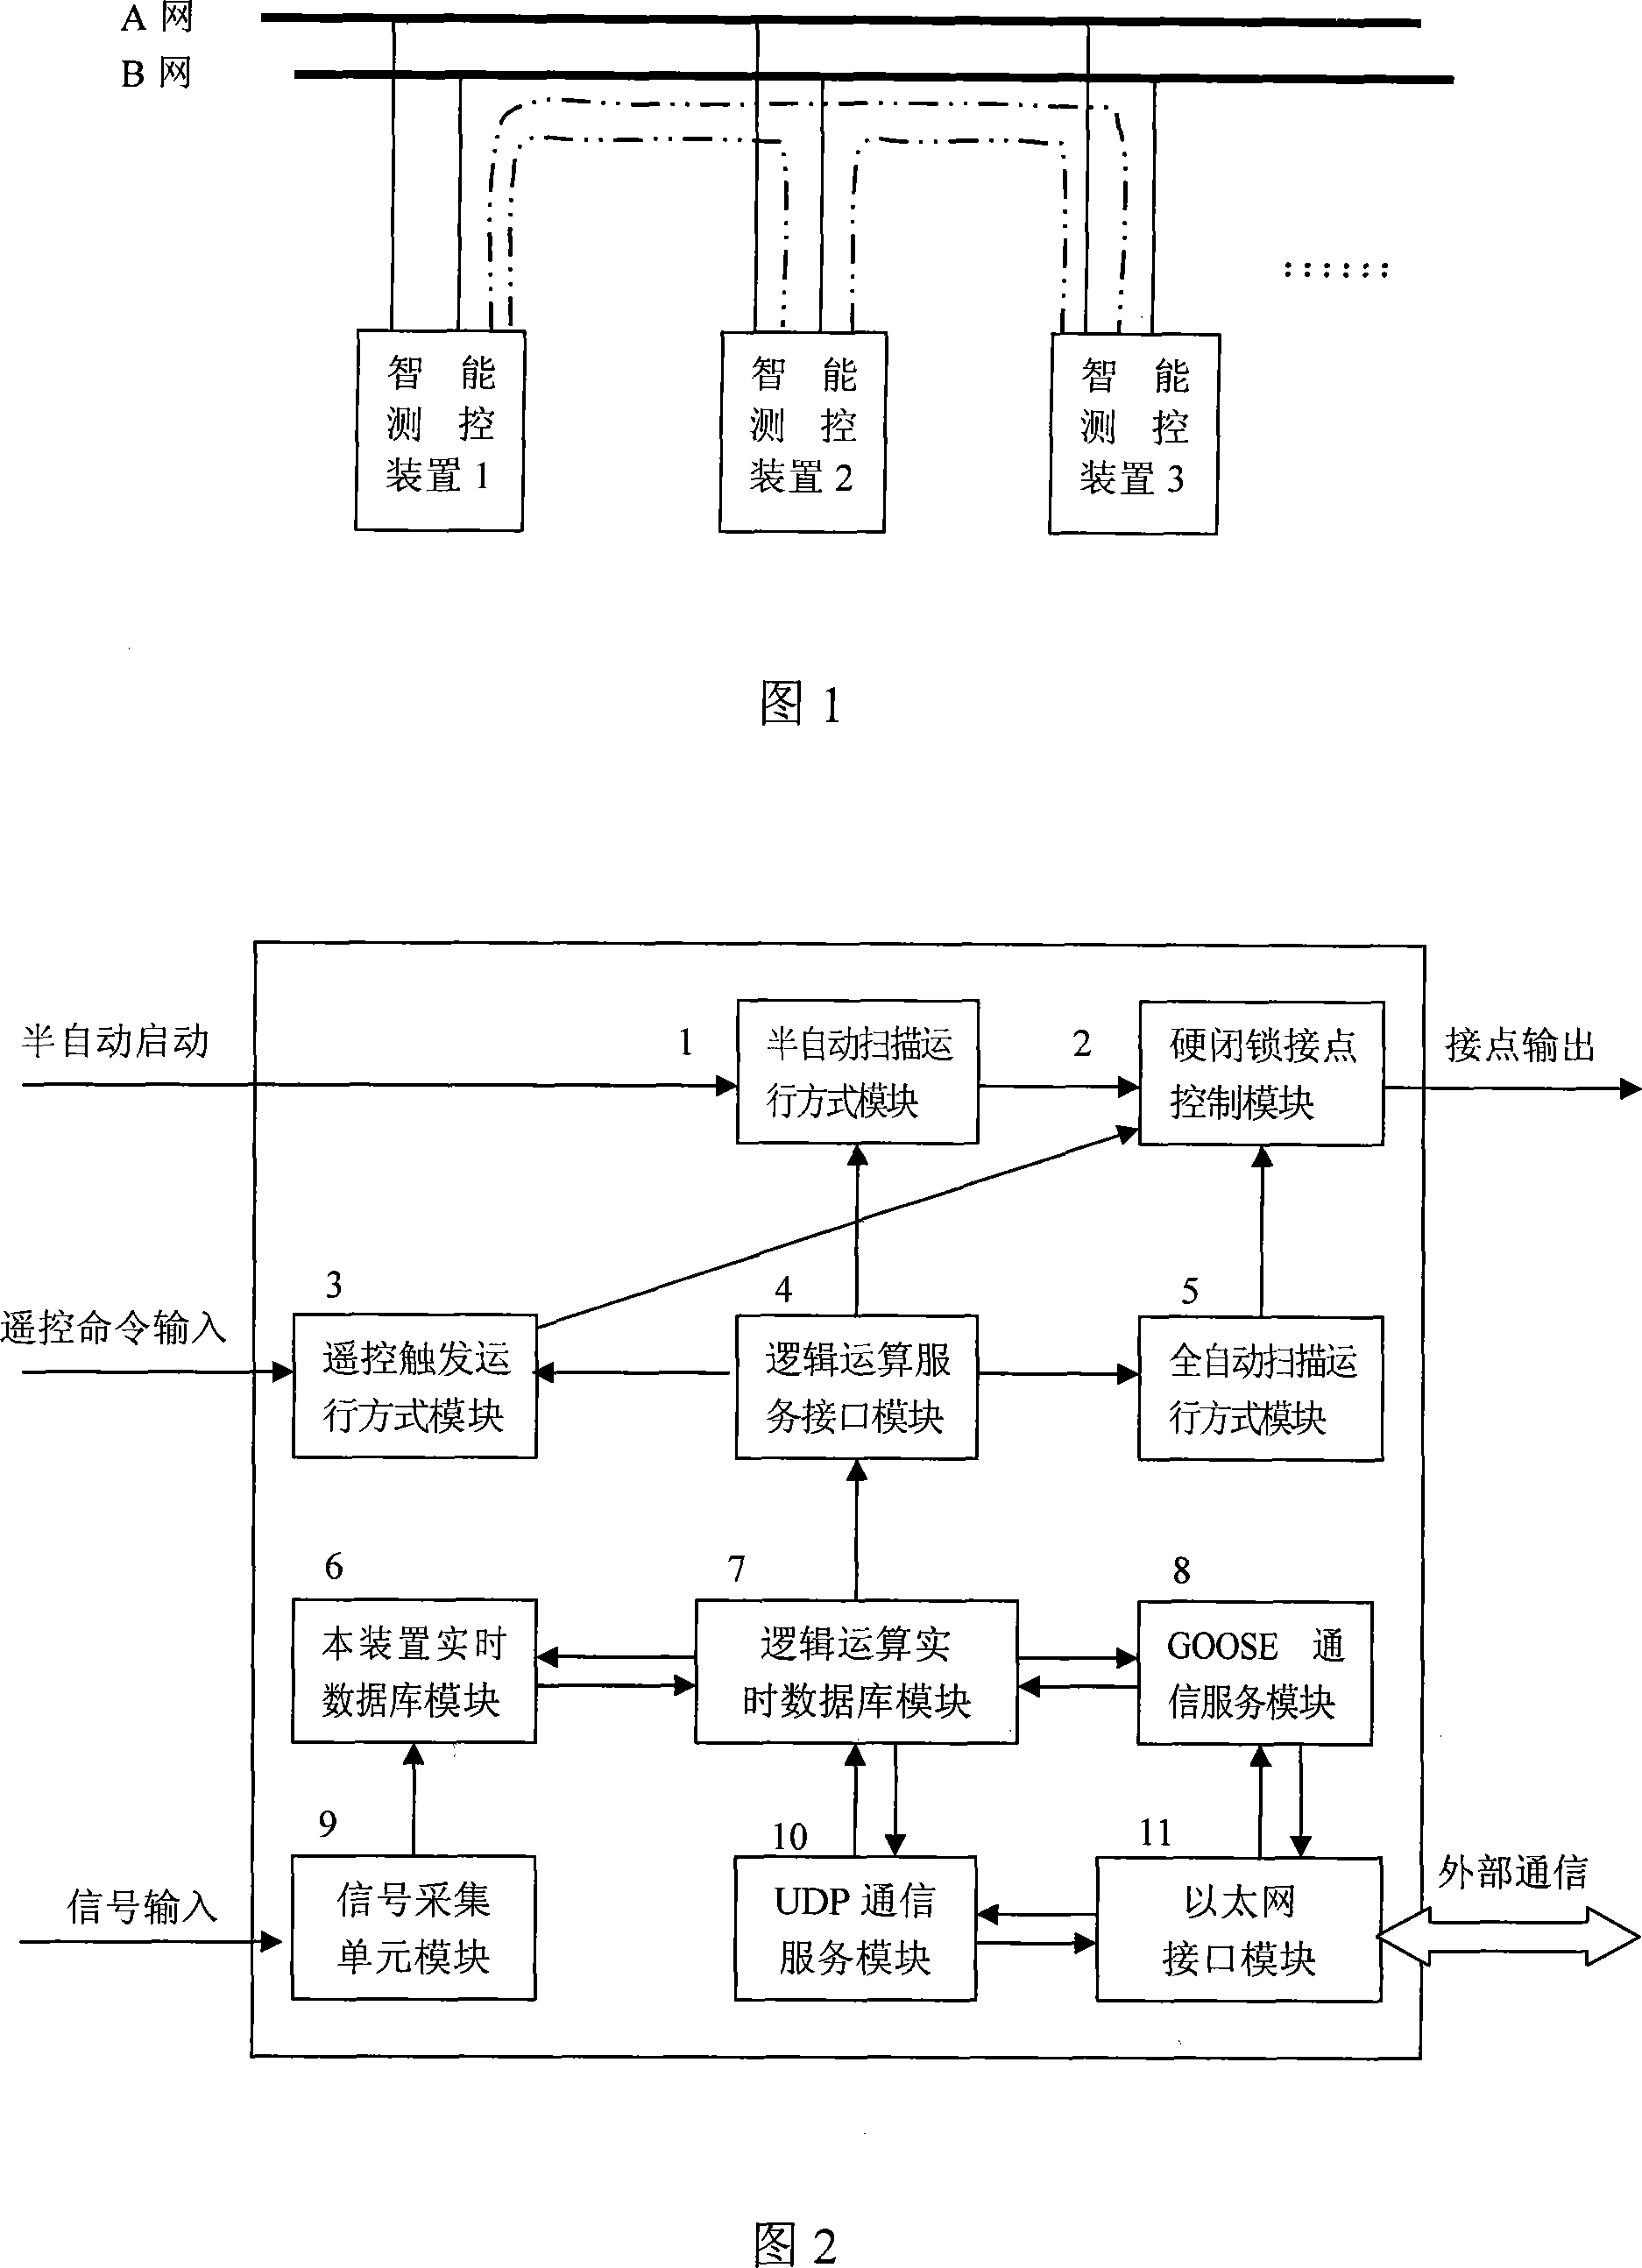 Error lock-proof function design scheme for intelligent measuring and control device